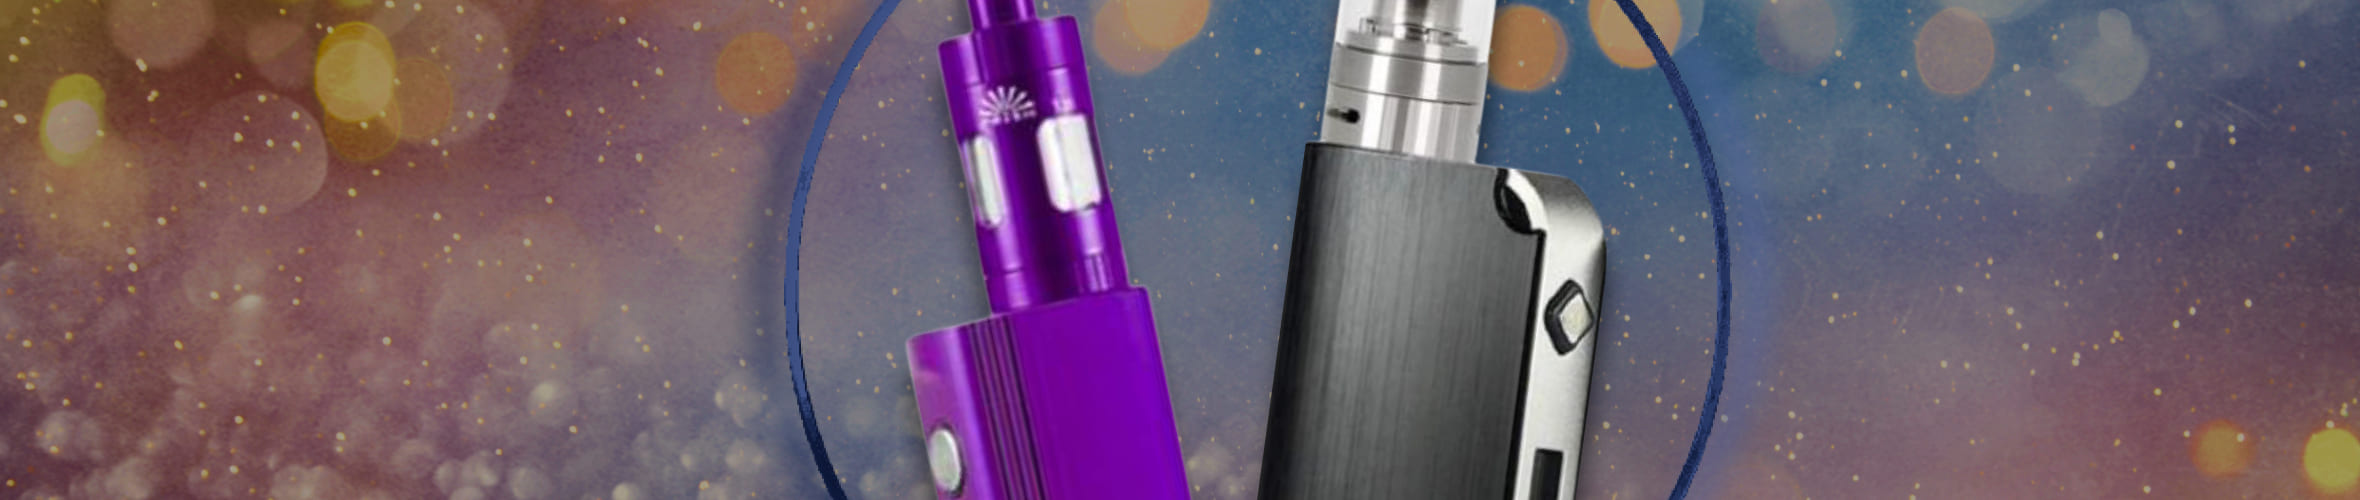 Innokin Electronic Cigarettes and Mods Review